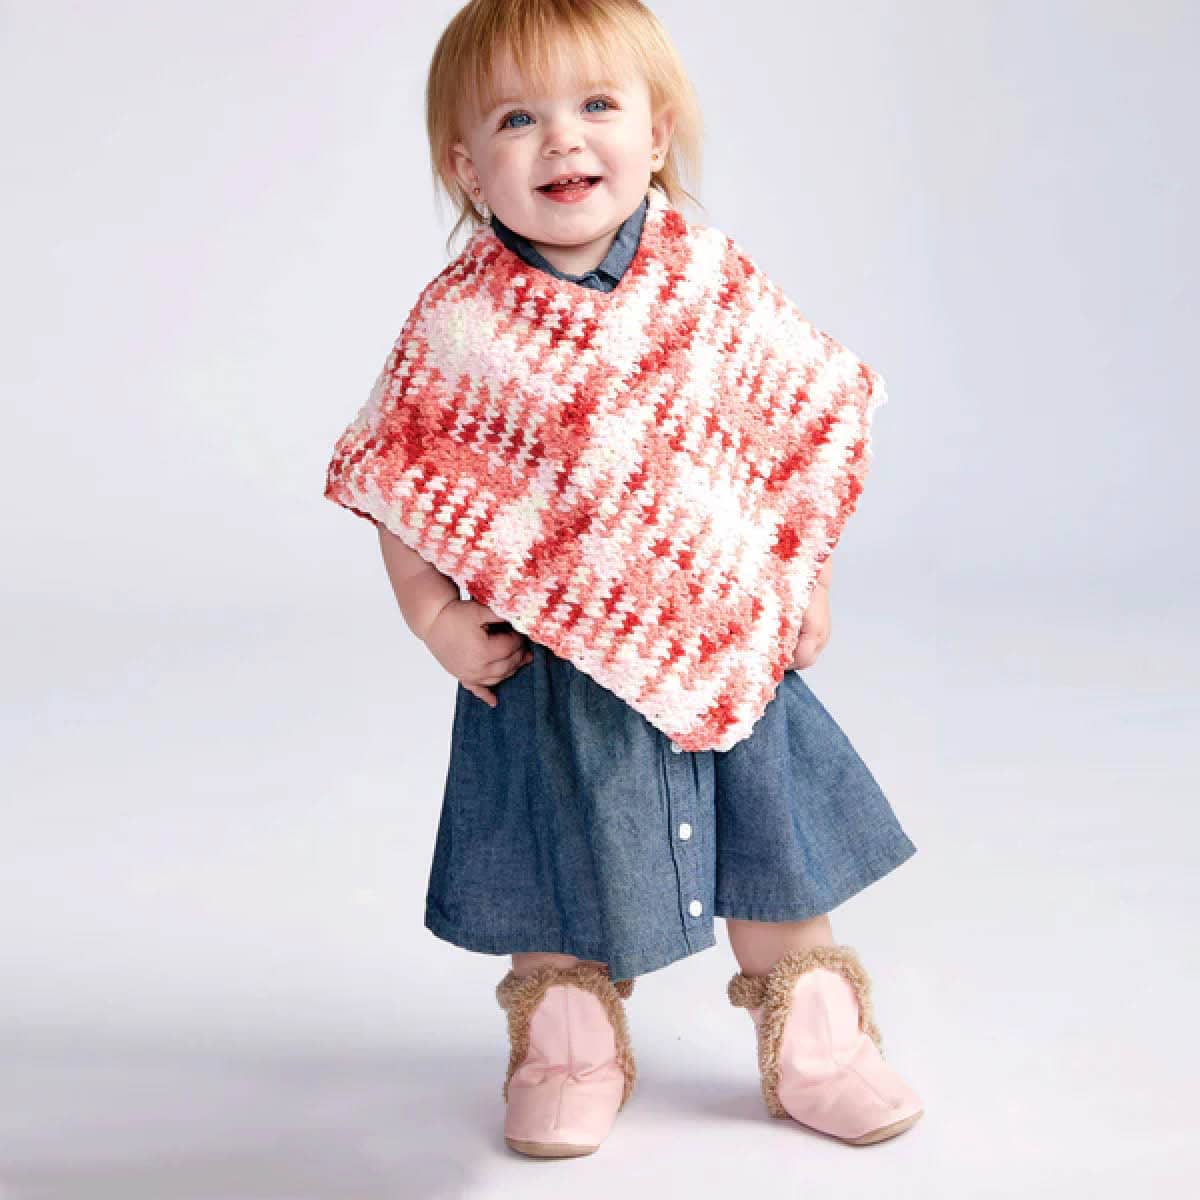 Crochet Baby Poncho Pattern in 2 Pieces